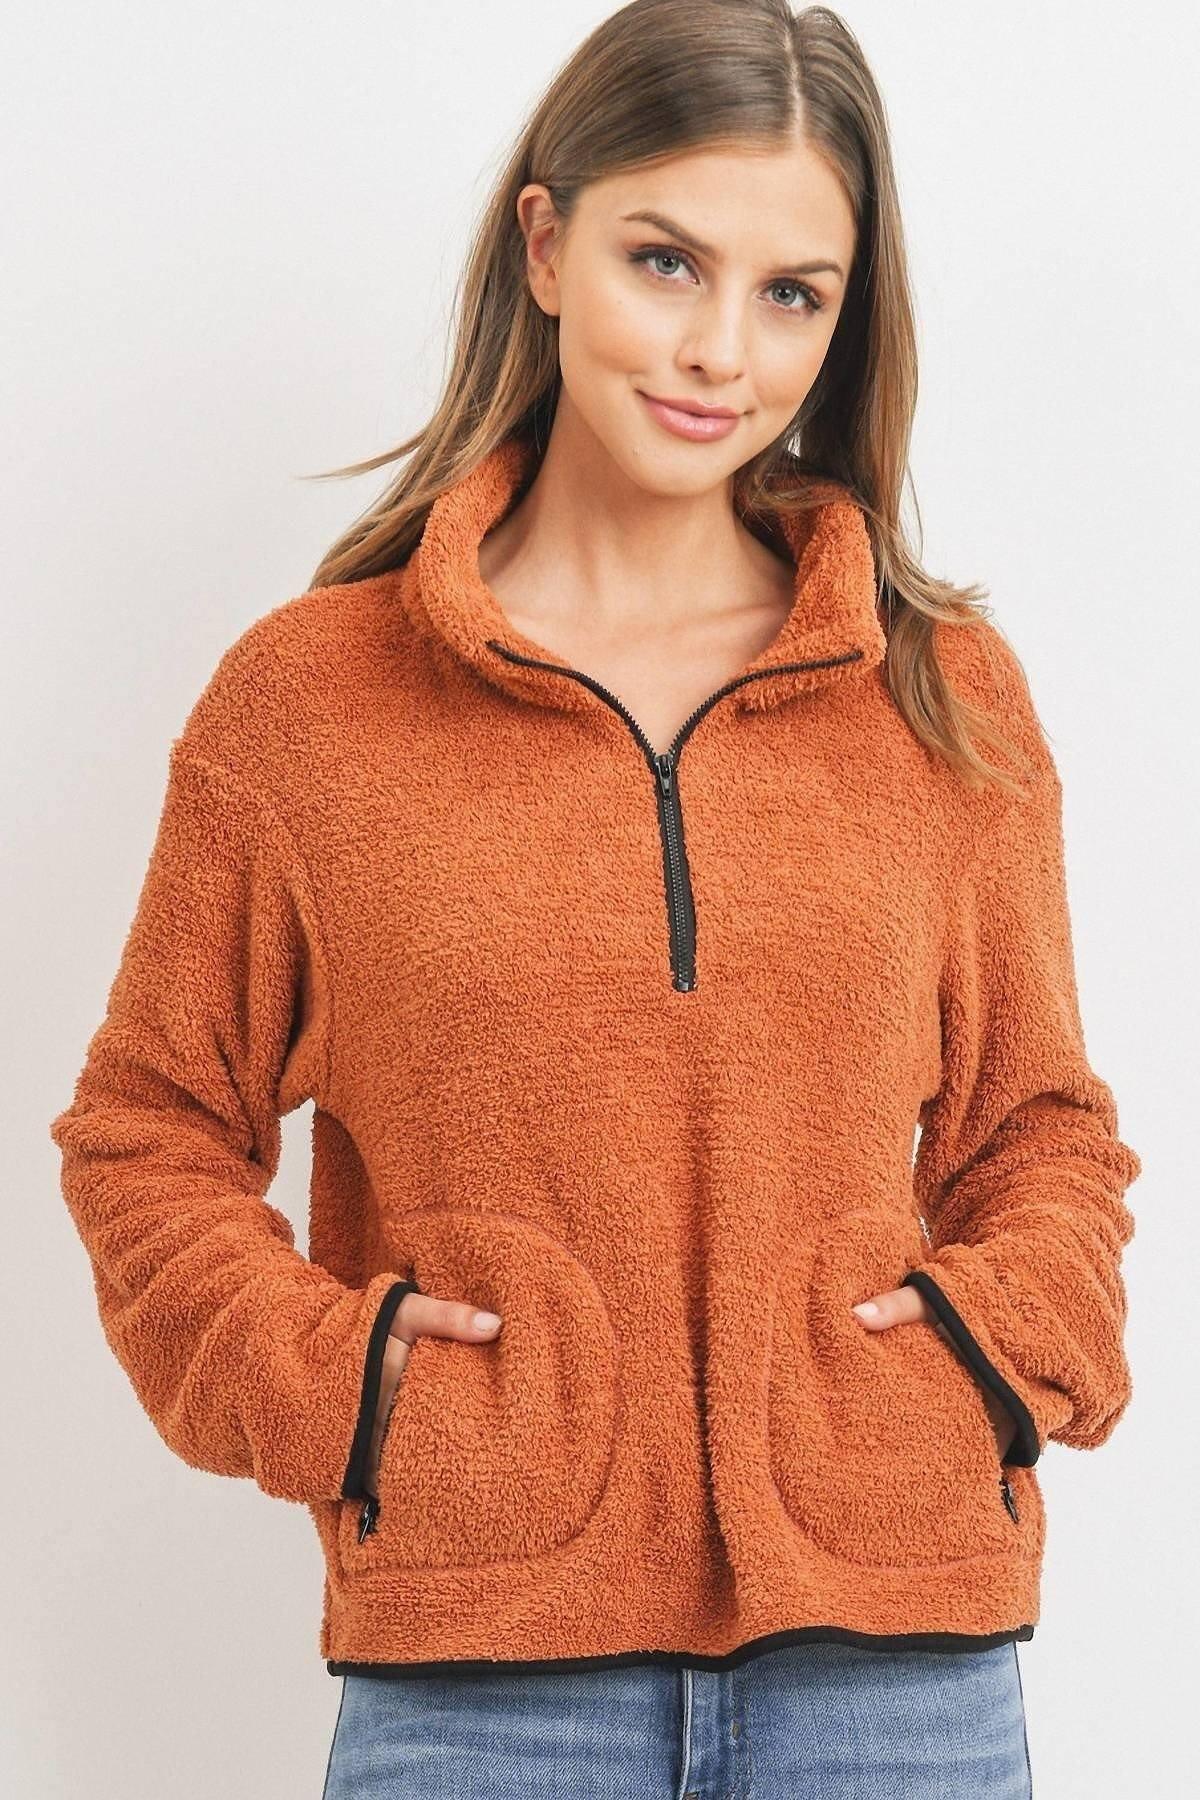 Long Sleeve Half Zipper Pullover Loopie Terry Naughty Smile Fashion